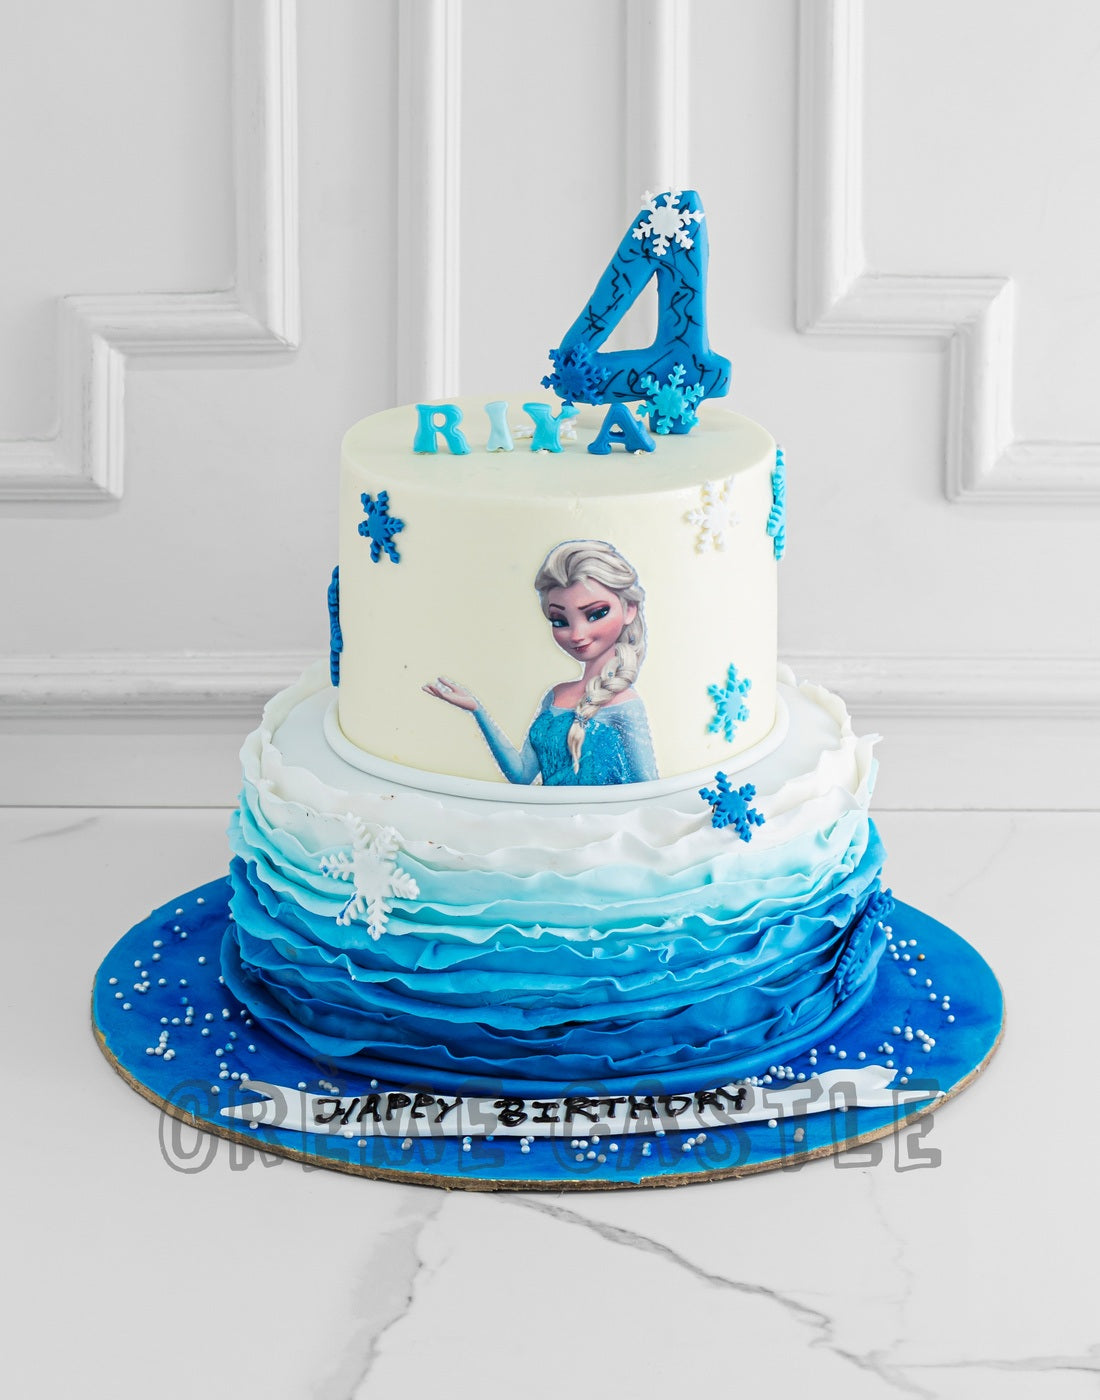 Frozen Theme Cake and Party - Motherhood Full of Dreams